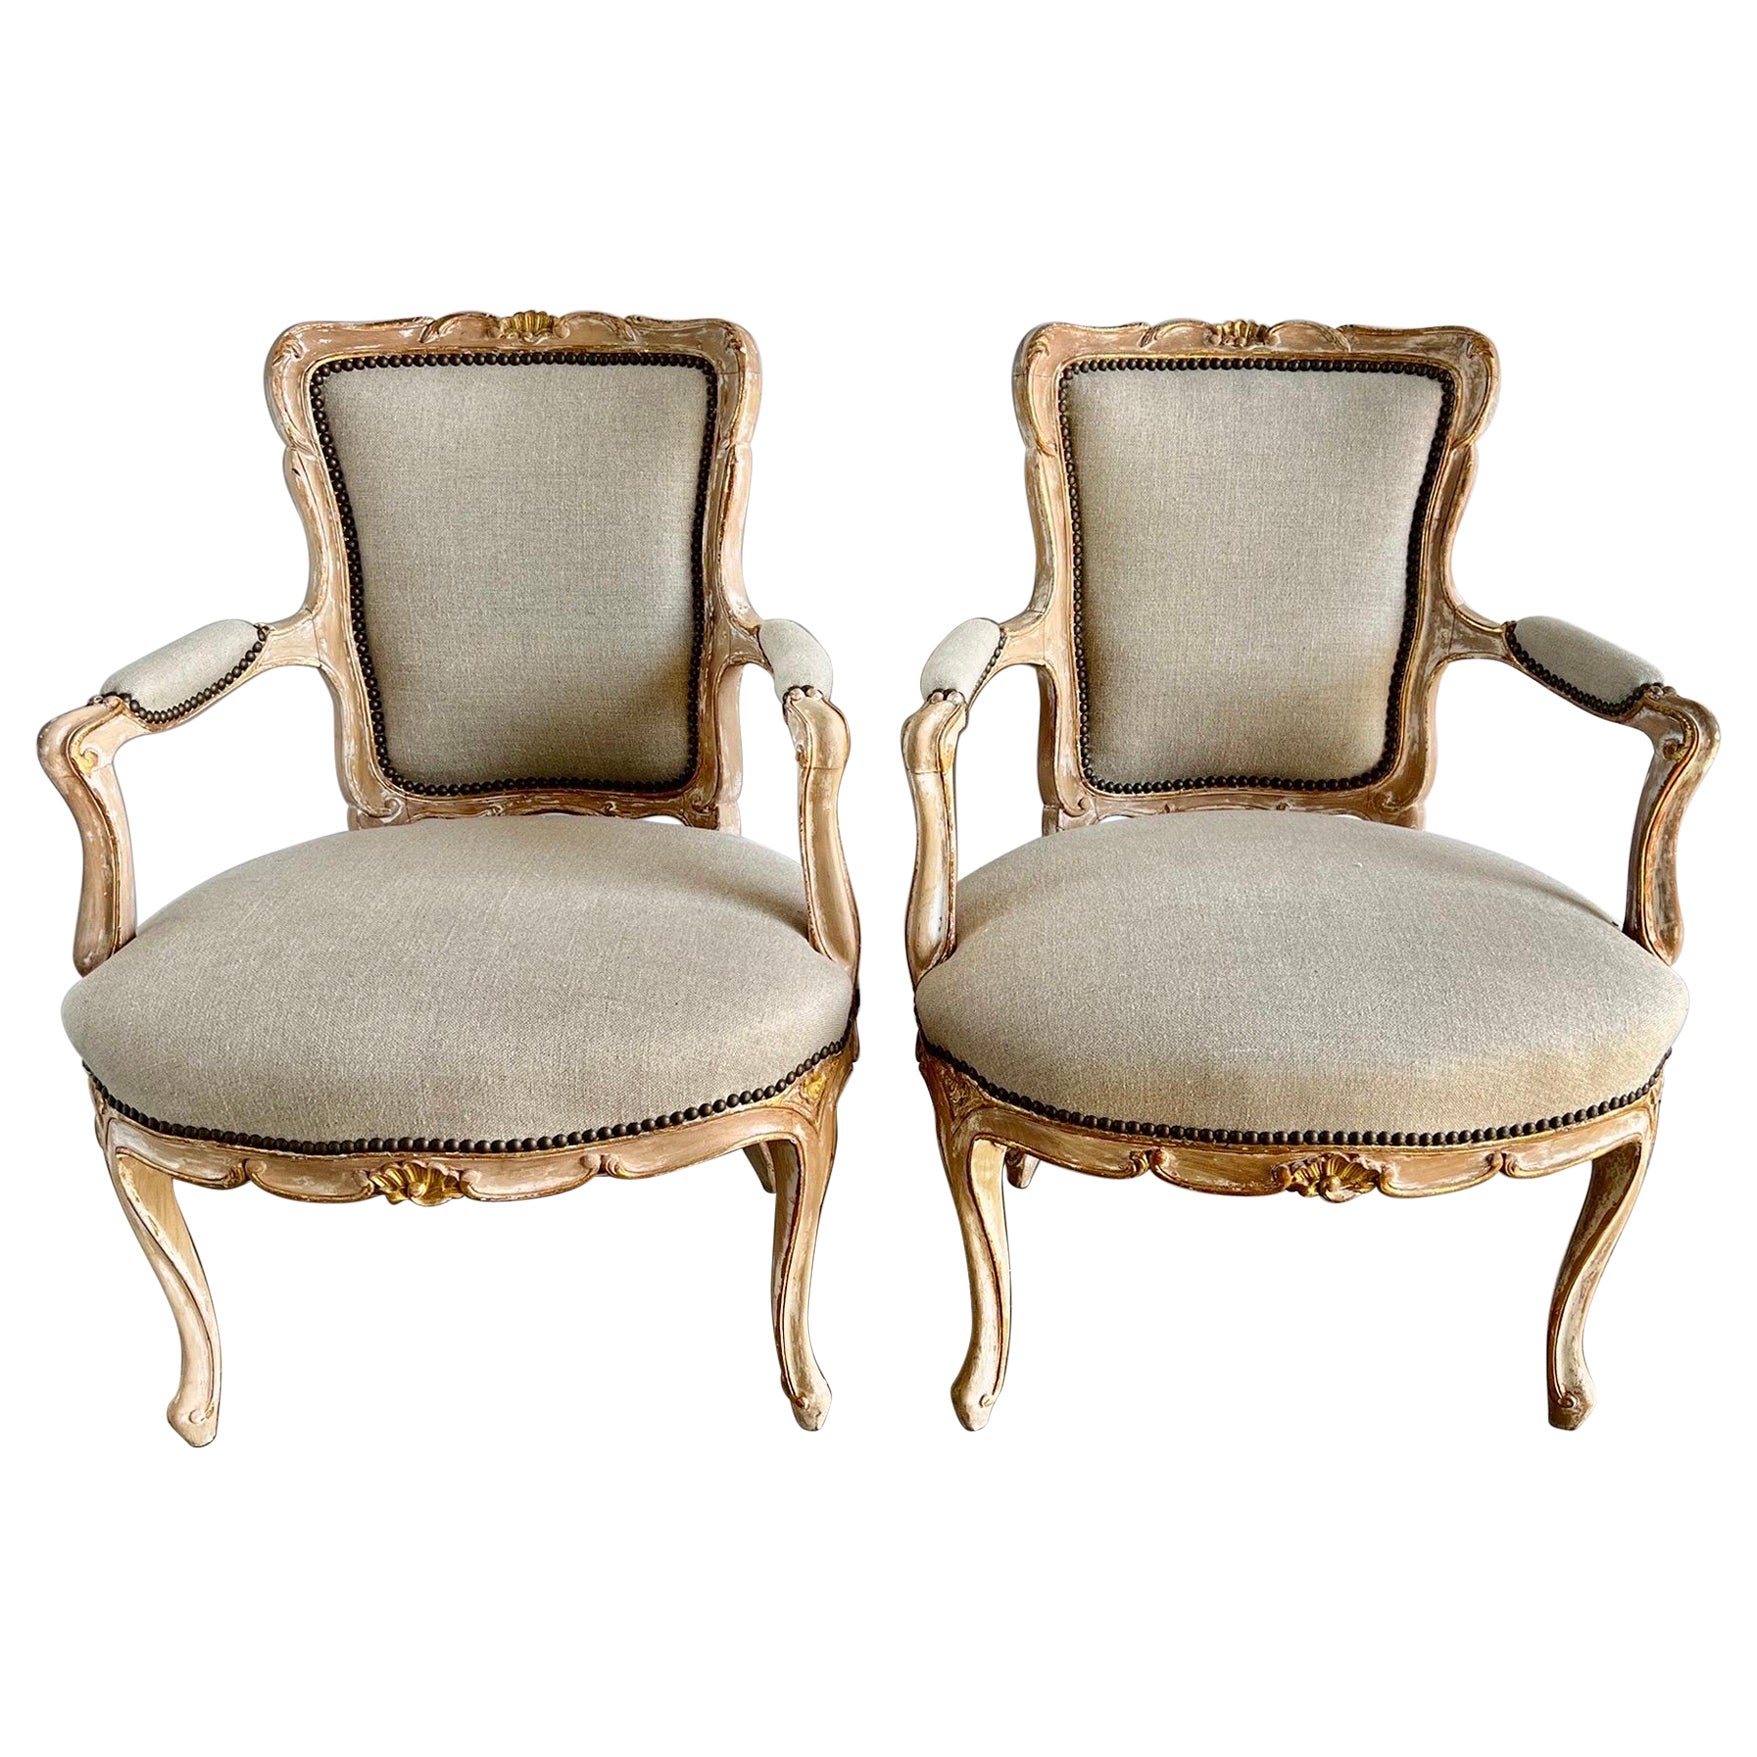 Pair of French Painted Louis XV Style Armchairs